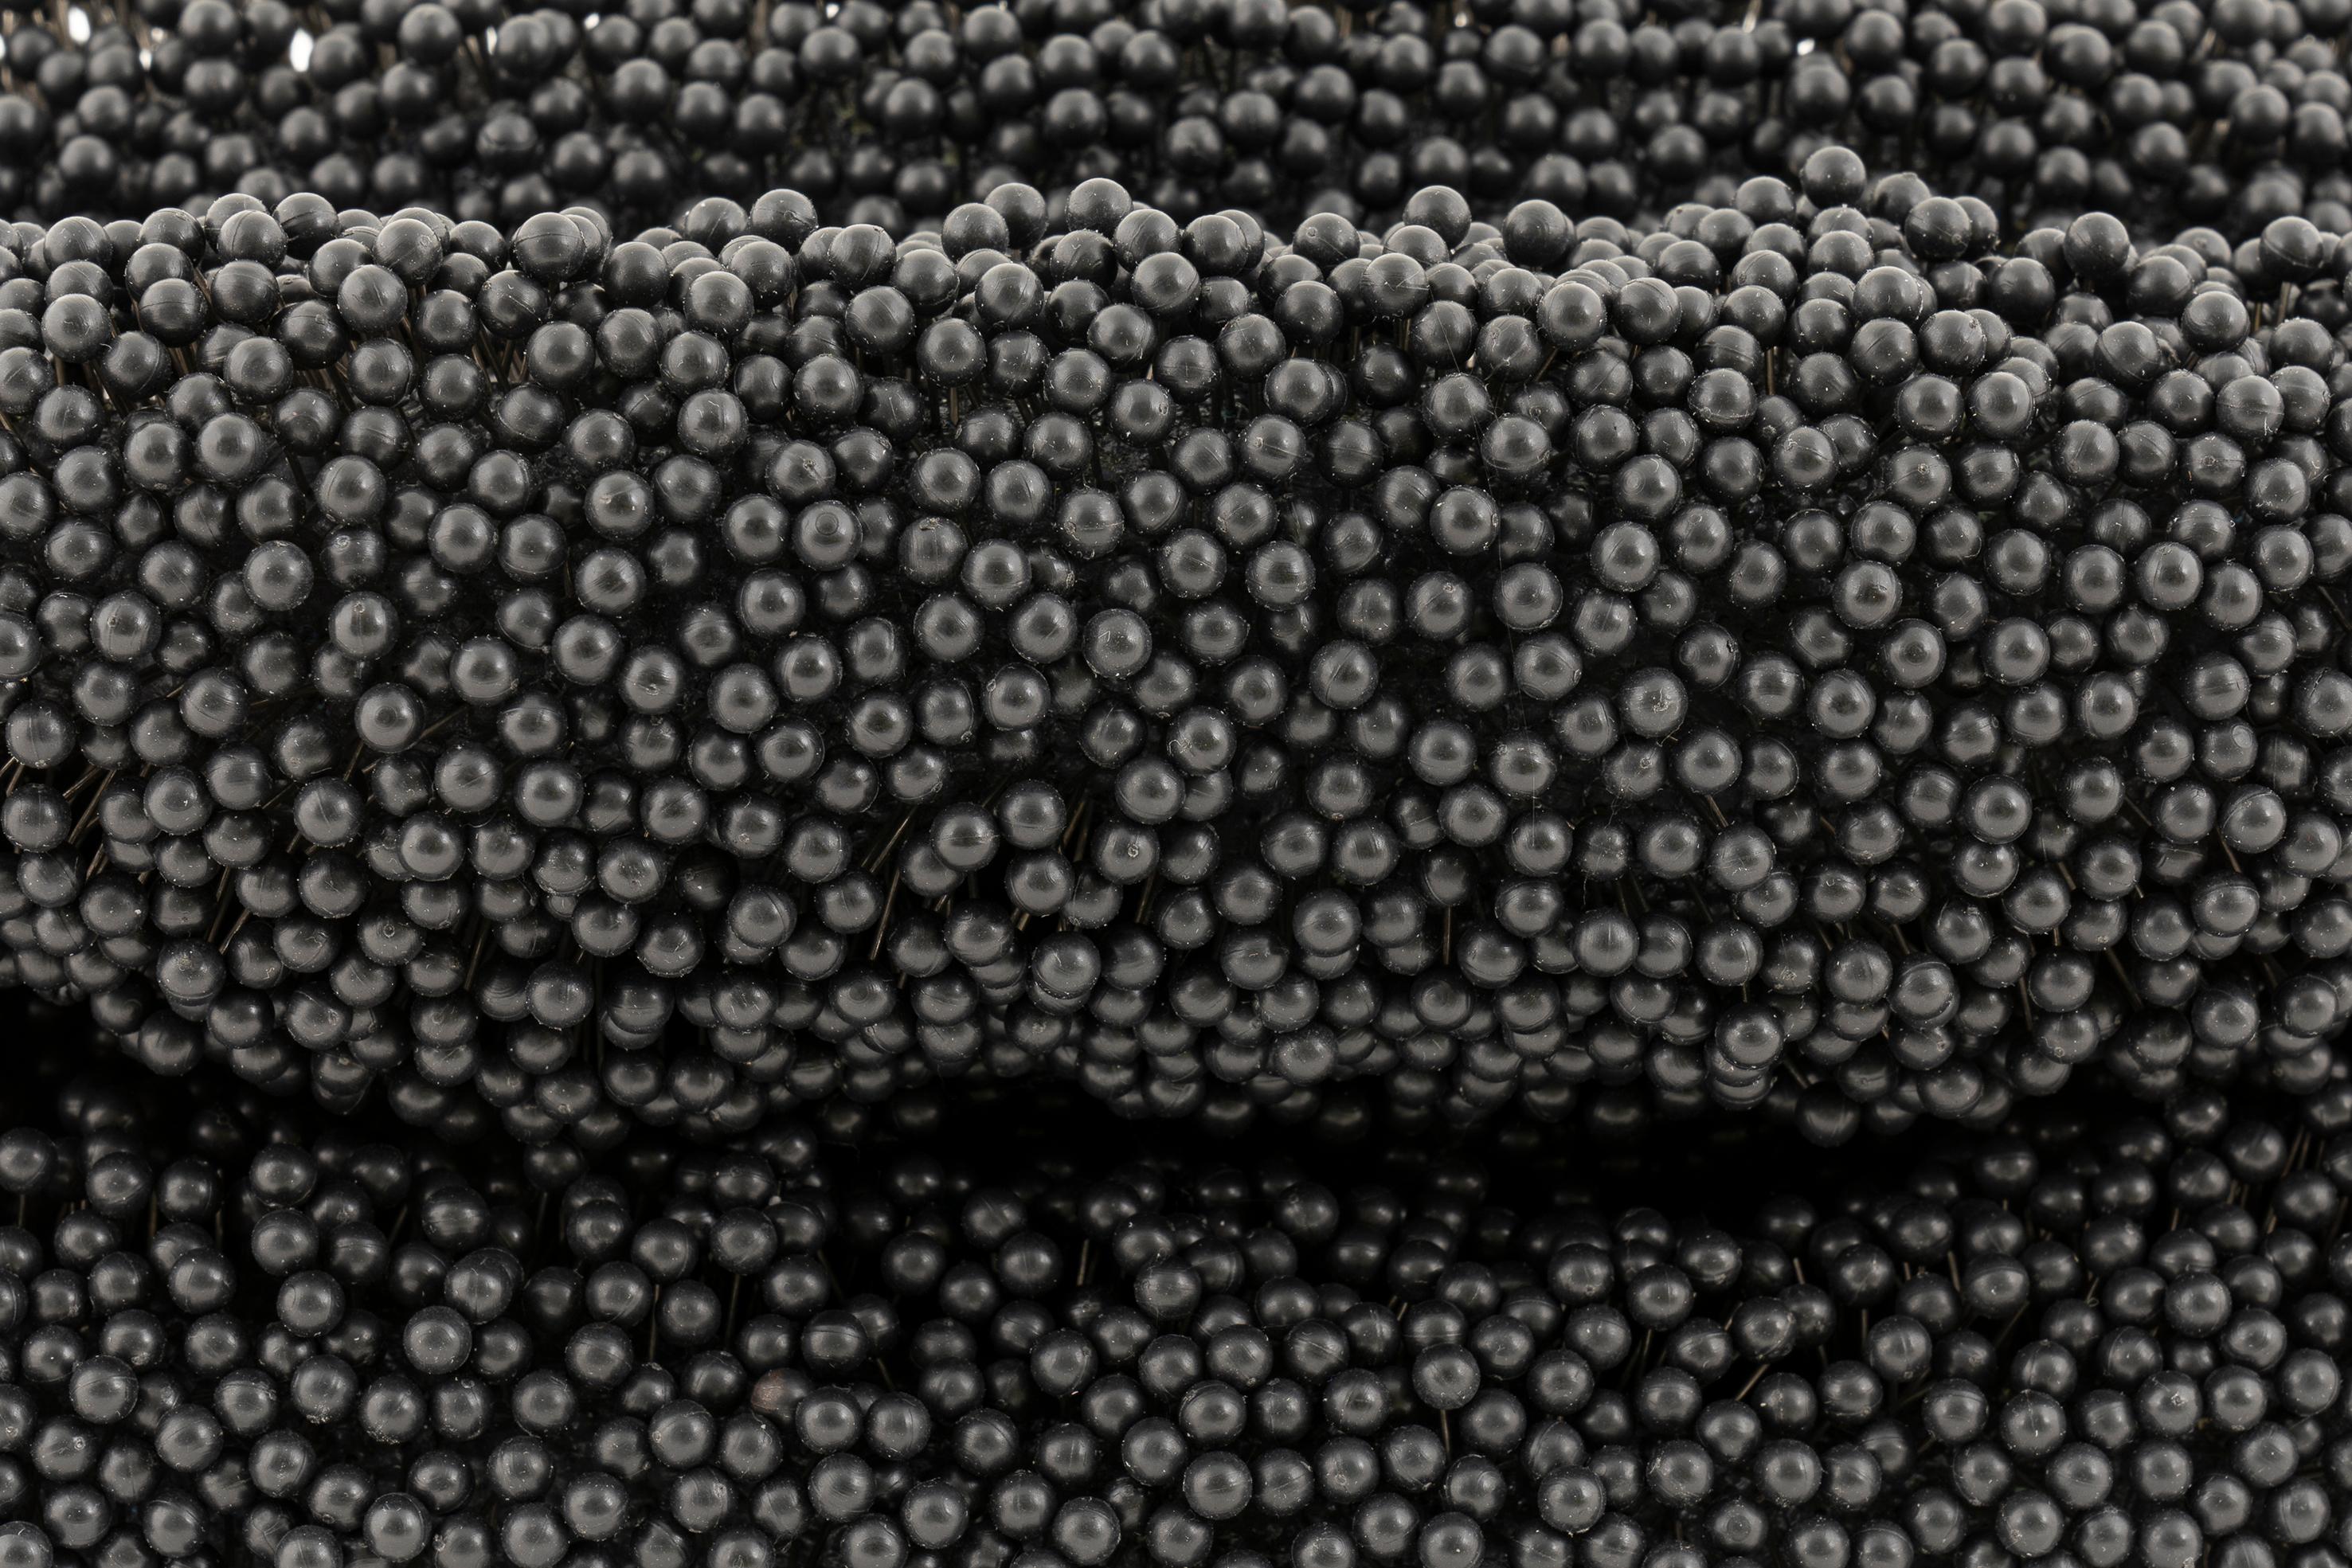 Black Hole, a unique sculpture by artist Petr Pavlik belongs to a series of ‘tabletop sculptures’ made between 2020-21. 

Here the surface of a deflated ball is embellished with over 8,000 map pins. This painstaking process eventually produces a